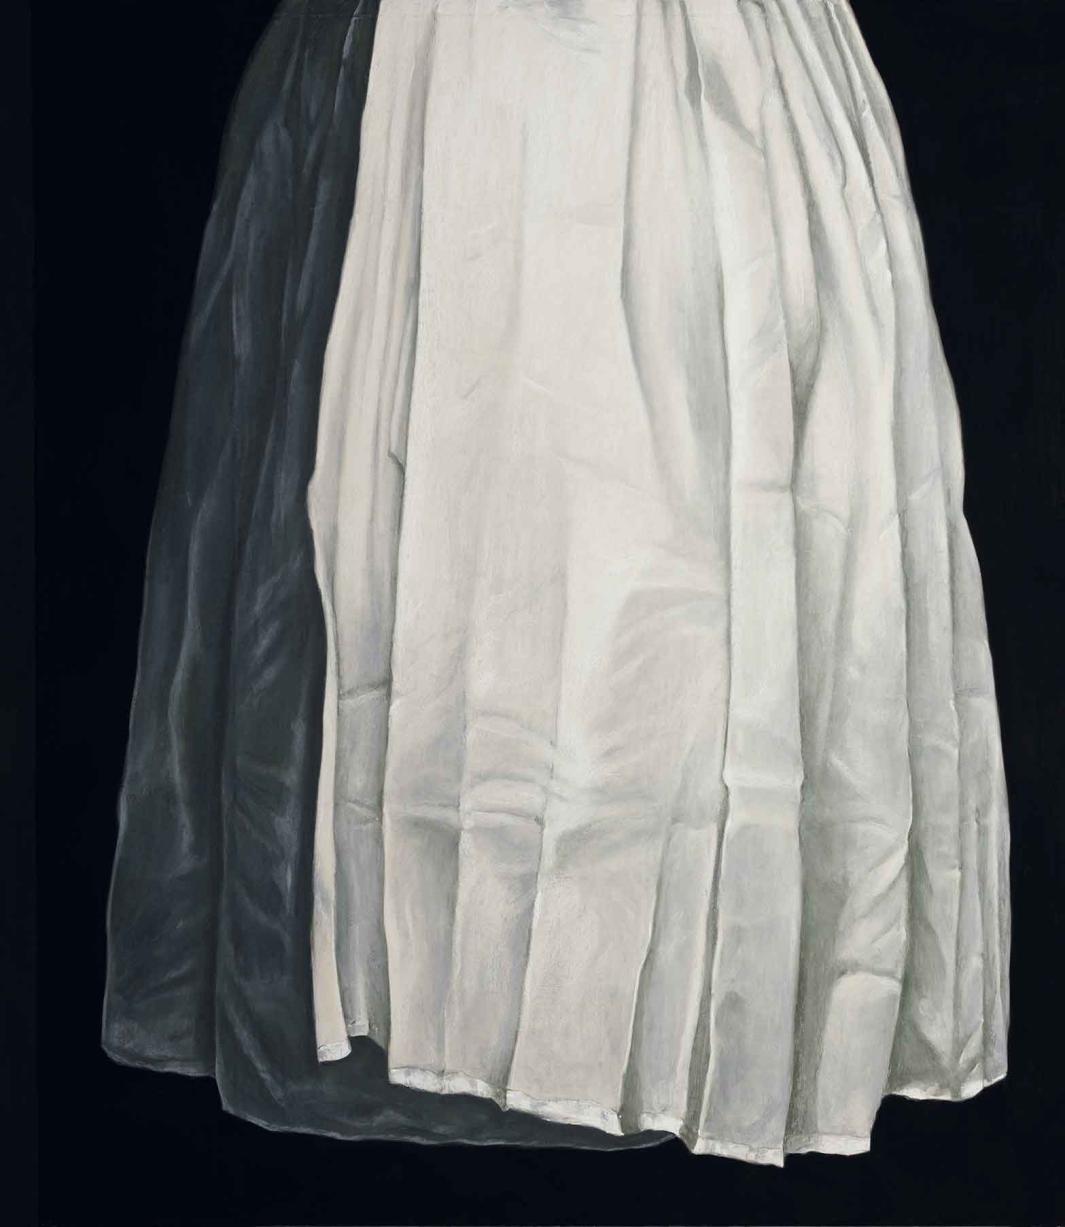 Image of large pleated cloth, one large section white and one small section black, hanging down over a black background